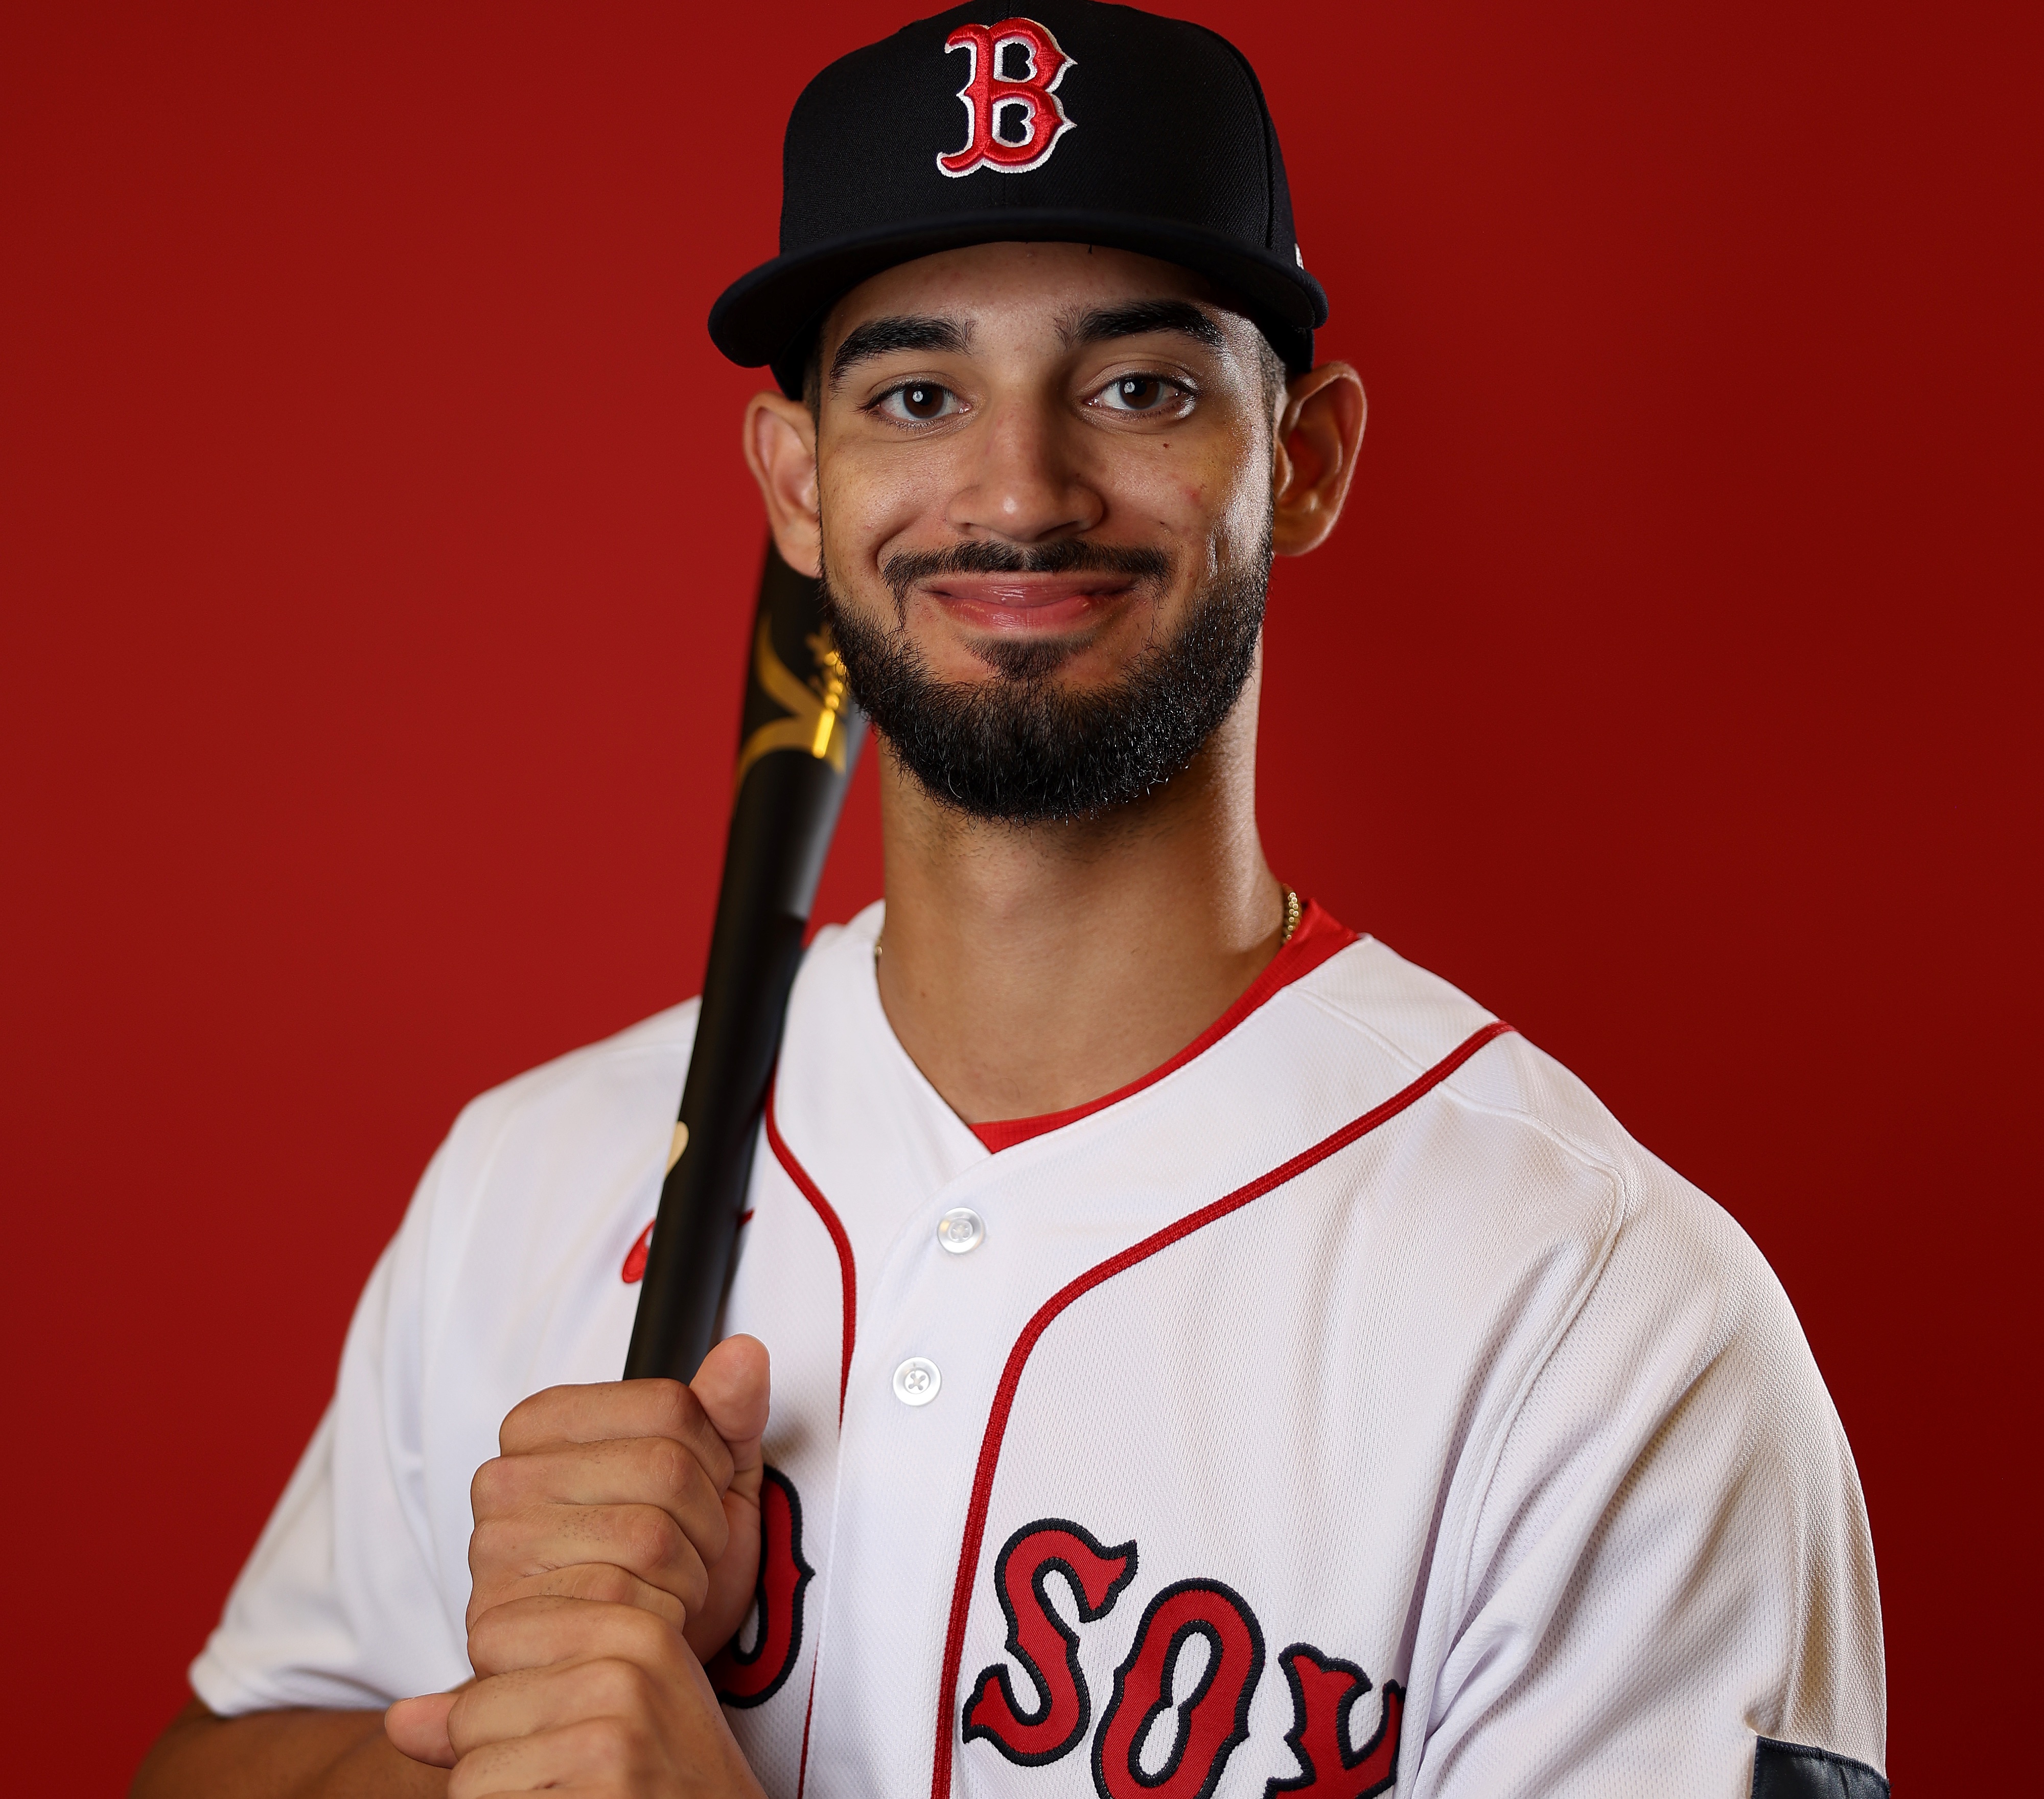 Just noticed there's 3 B's in the Red Sox hat : r/redsox